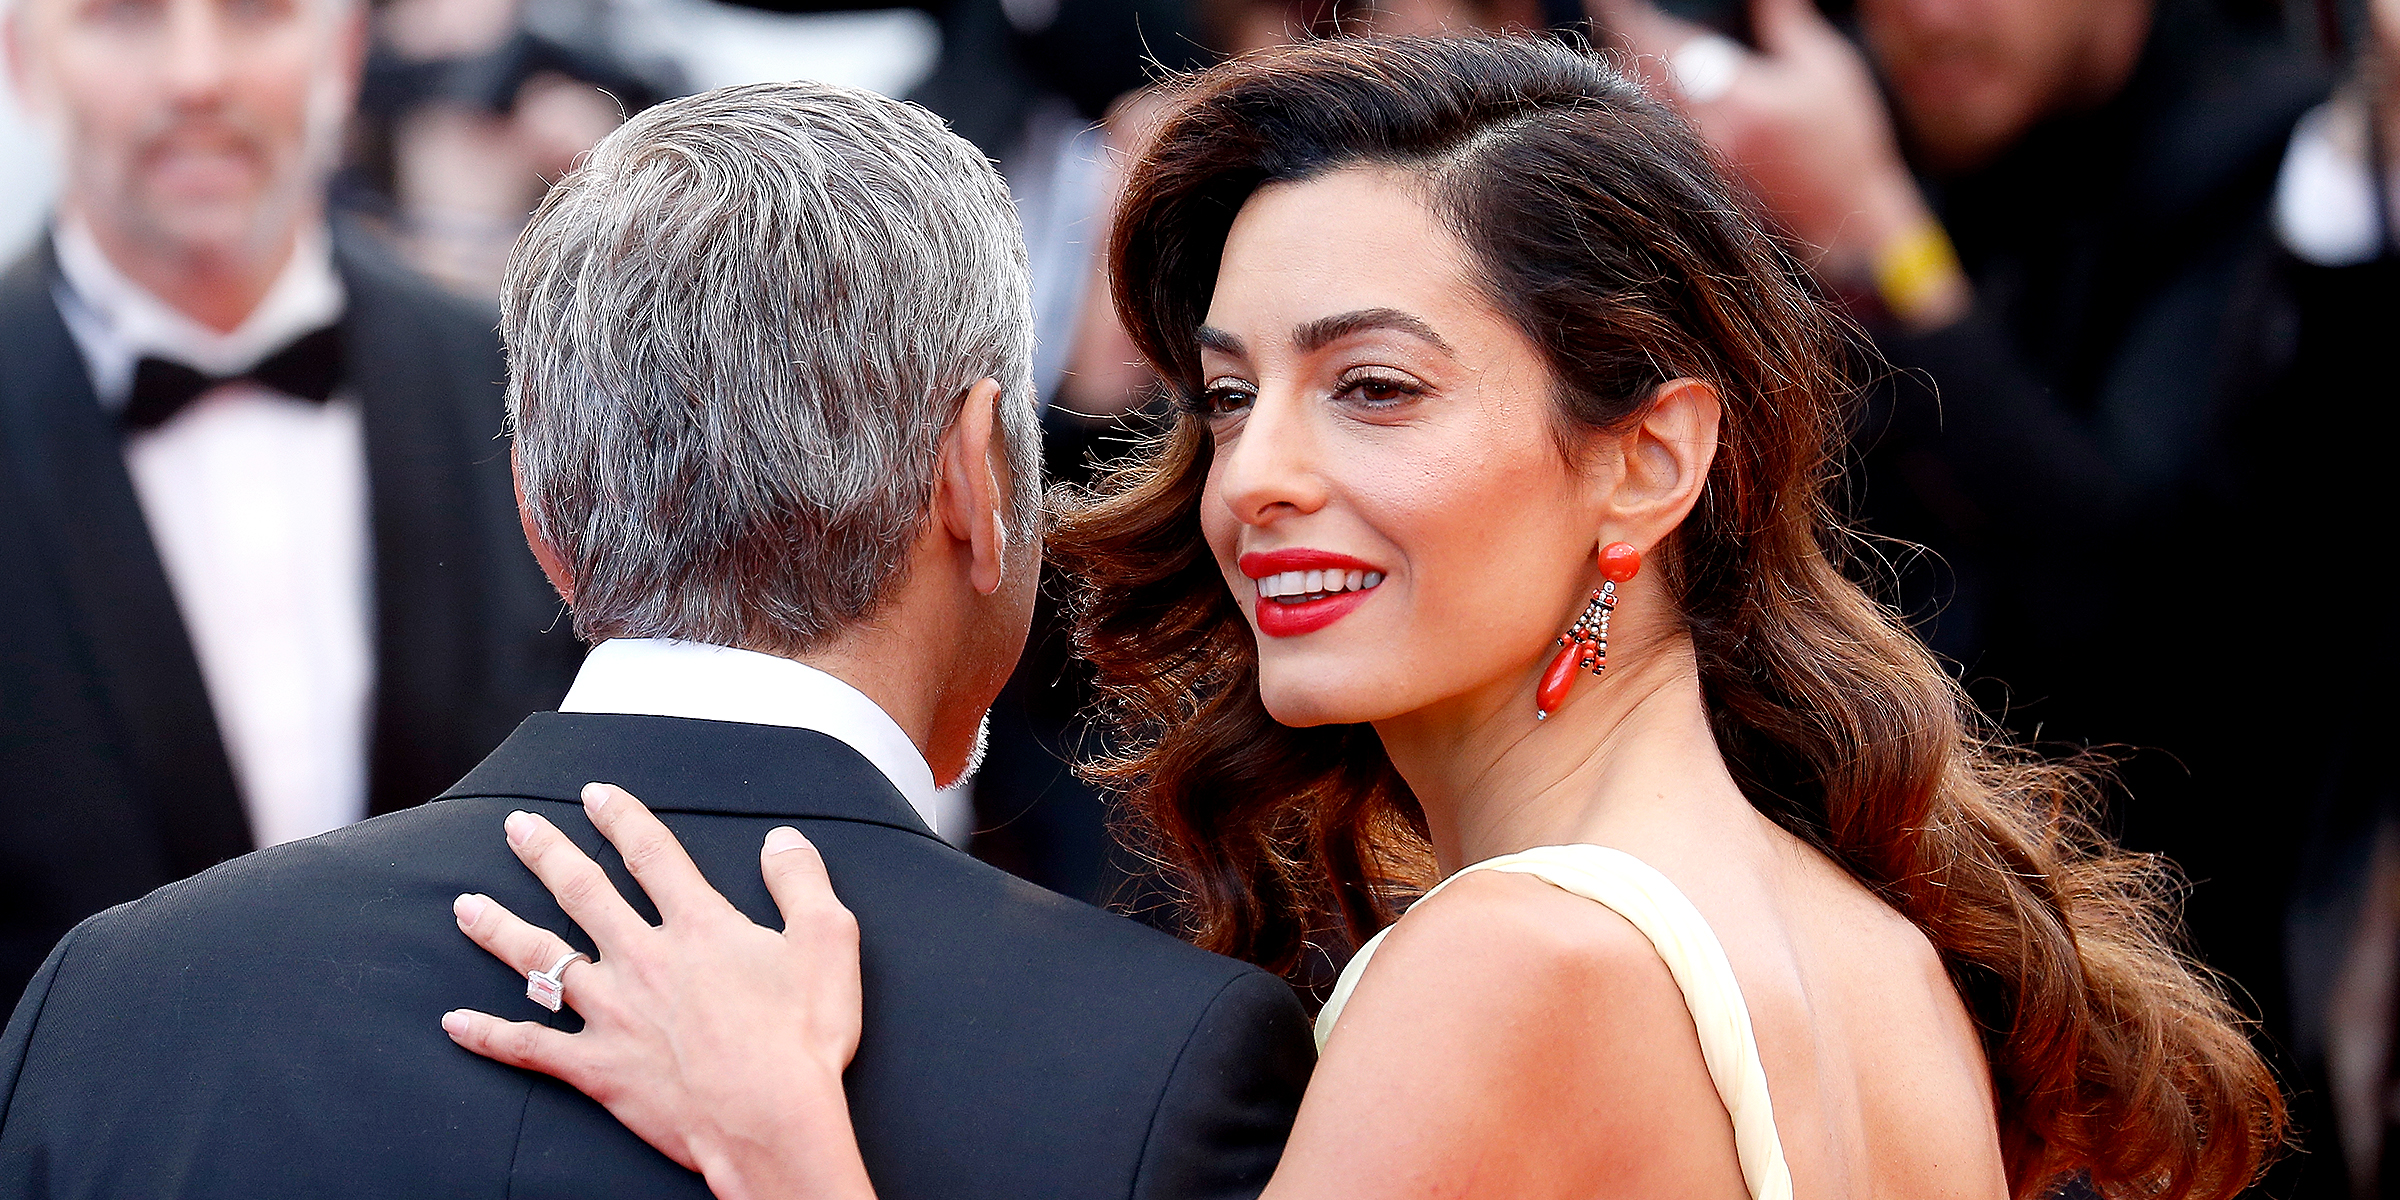 George Clooney and Amal Clooney | Source: Getty Images